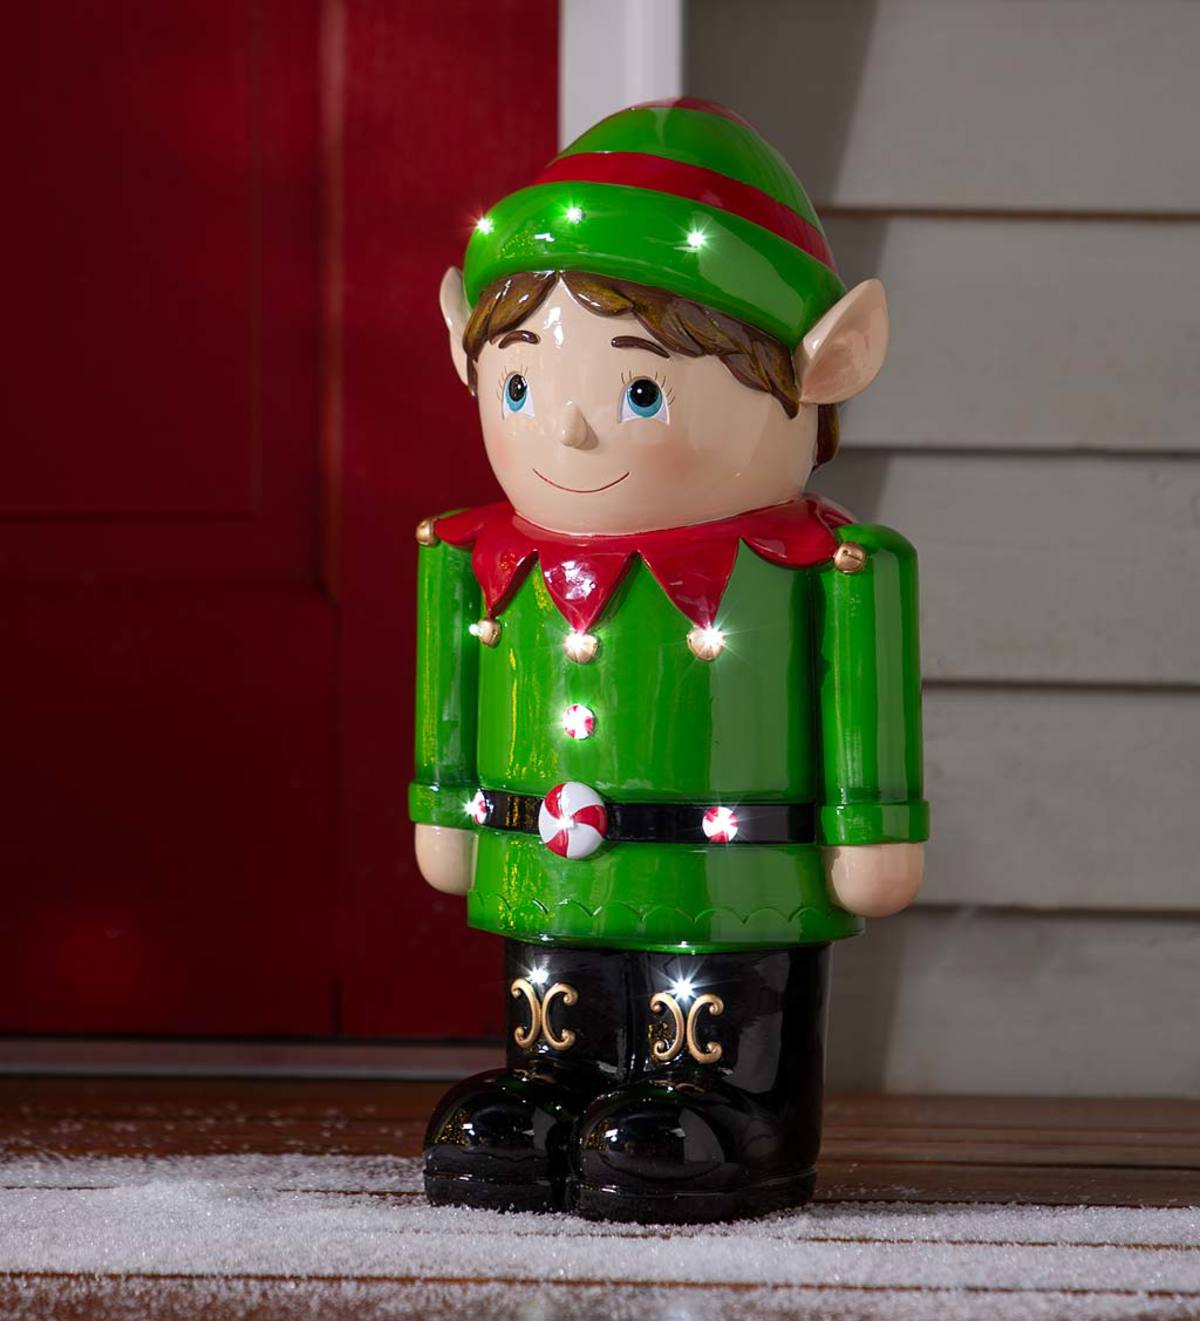 Indoor/Outdoor Lighted Shorty Elf Holiday Statue | Plow & Hearth